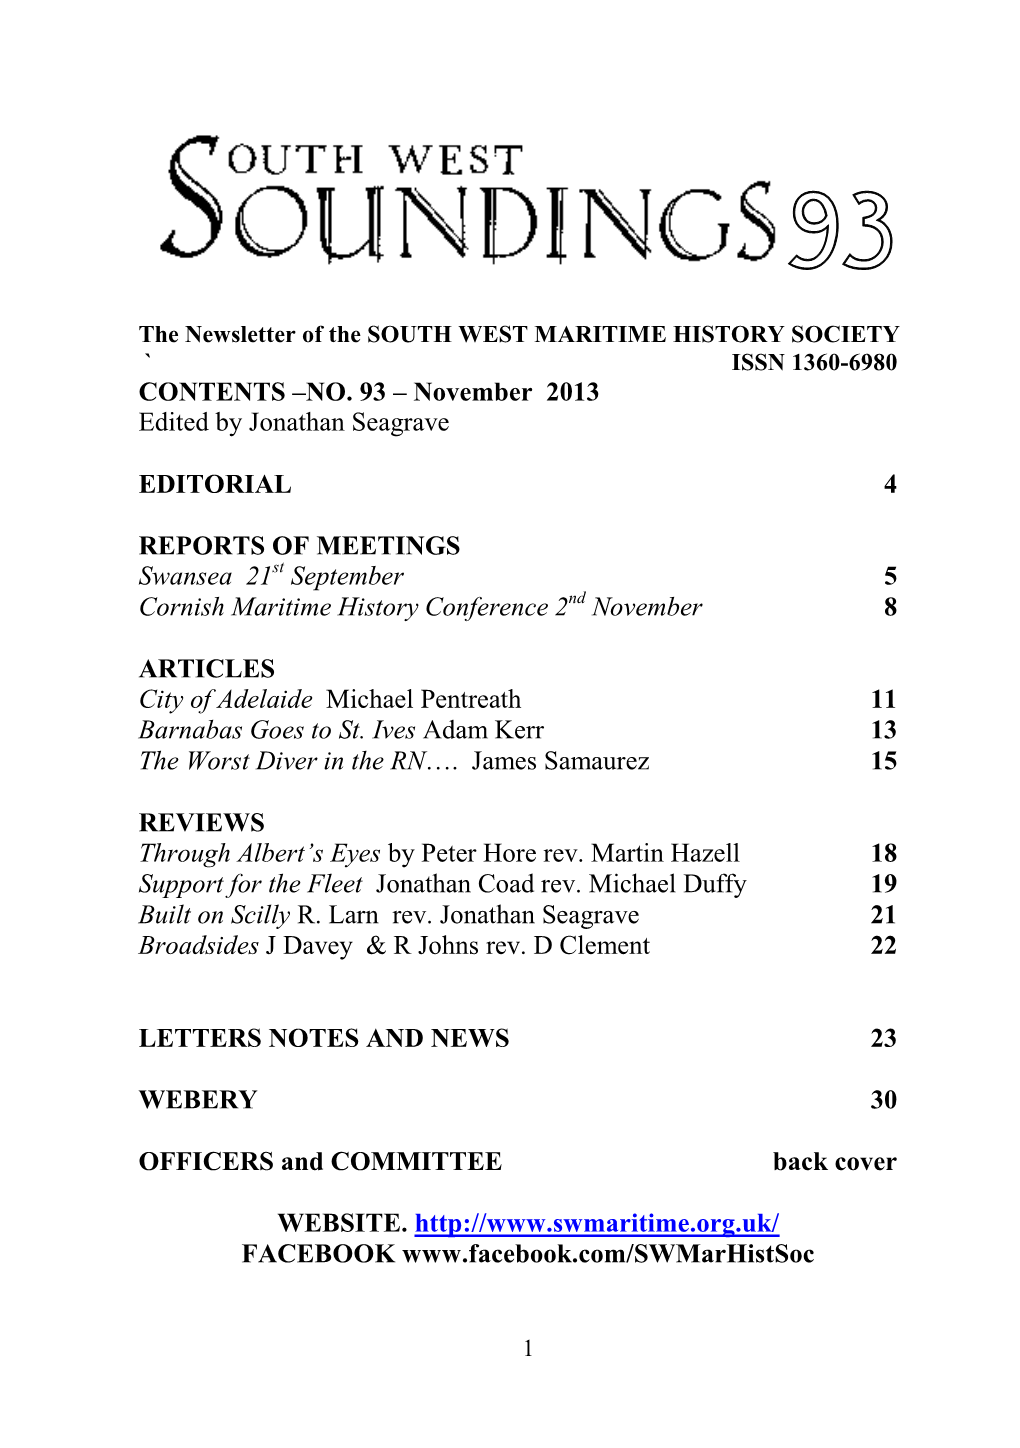 CONTENTS –NO. 93 – November 2013 Edited by Jonathan Seagrave